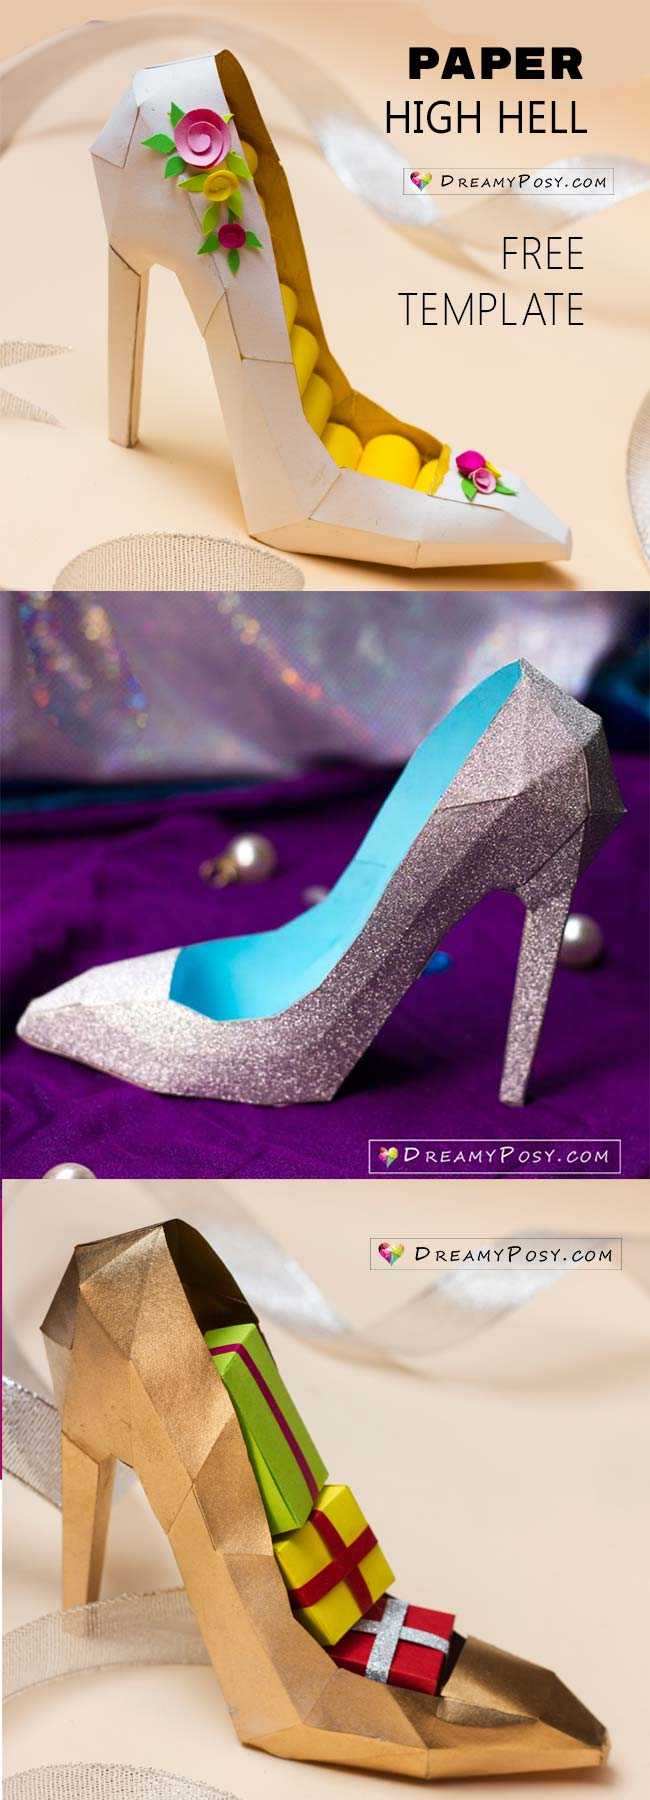 How To Make 3D Paper Shoe As A Gift Box, Free Template Inside High Heel Shoe Template For Card